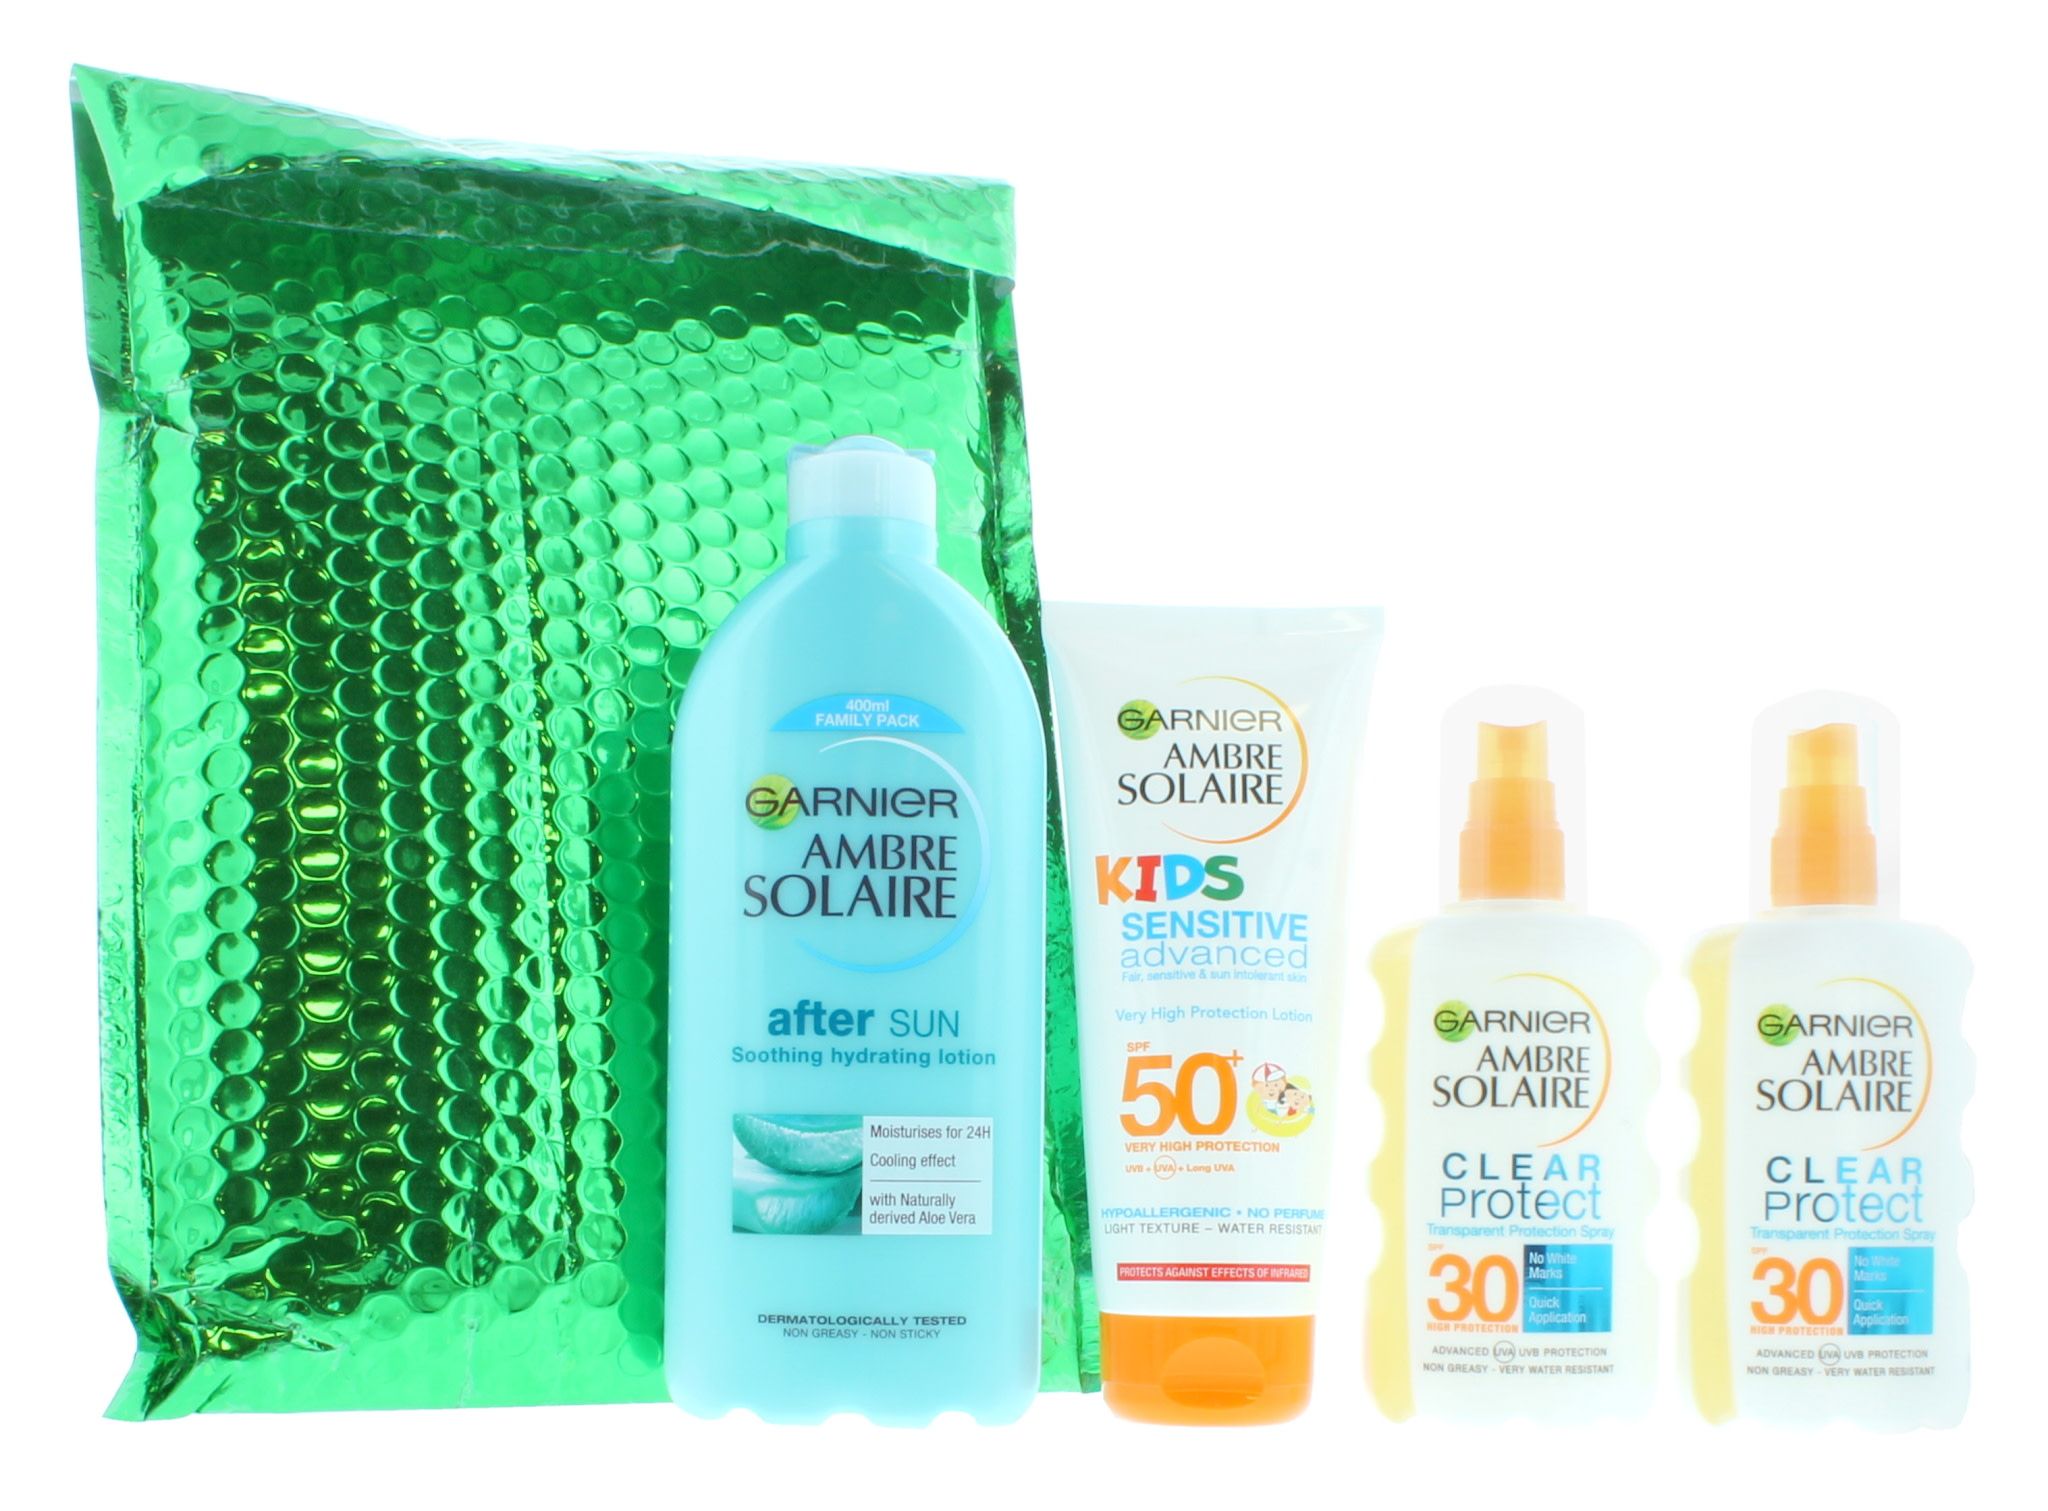 Ambre Solaire Family Sun Care Kit - After Sun + 2 x SPF30 and Kids SPF50. Clear Protect Sun Cream Spray - This high protection, transparent formula leaves no white marks. Non-greasy, water-resistant. Sensitive Enhanced Kids Lotion - This very high protection SPF50+ lotion is specially developed for childrens’ delicate and sensitive skin; hypoallergenic, no perfumes or colourants. Family Size After Sun Lotion - Garnier after sun is enriched with naturally derived Aloe Vera; the formula provides 24 hours hydration and soothes and nourishes skin. All of Garnier sun protection products contain UVA and UVB protection and is tested under paediatric control. Garnier’s research into sun protection is recognised by the British skin foundation. This is a pack of 3.